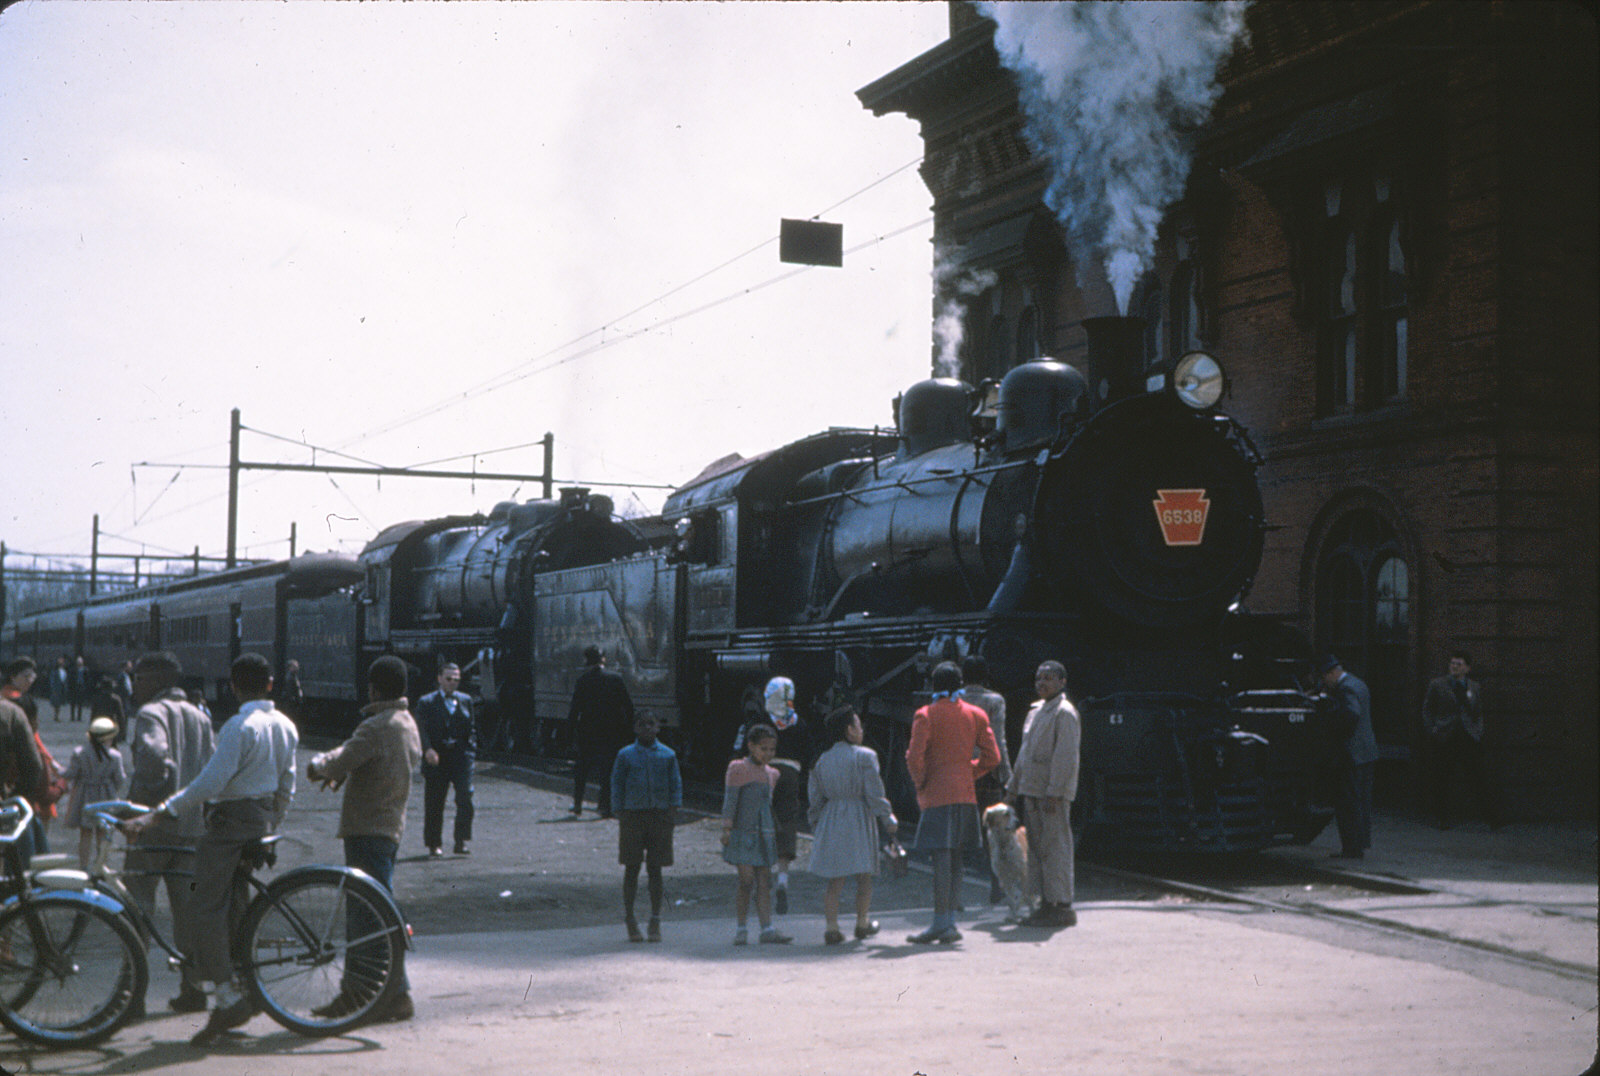 Steam Excursion at West Chester about to depart for Frazer - c. 1940s